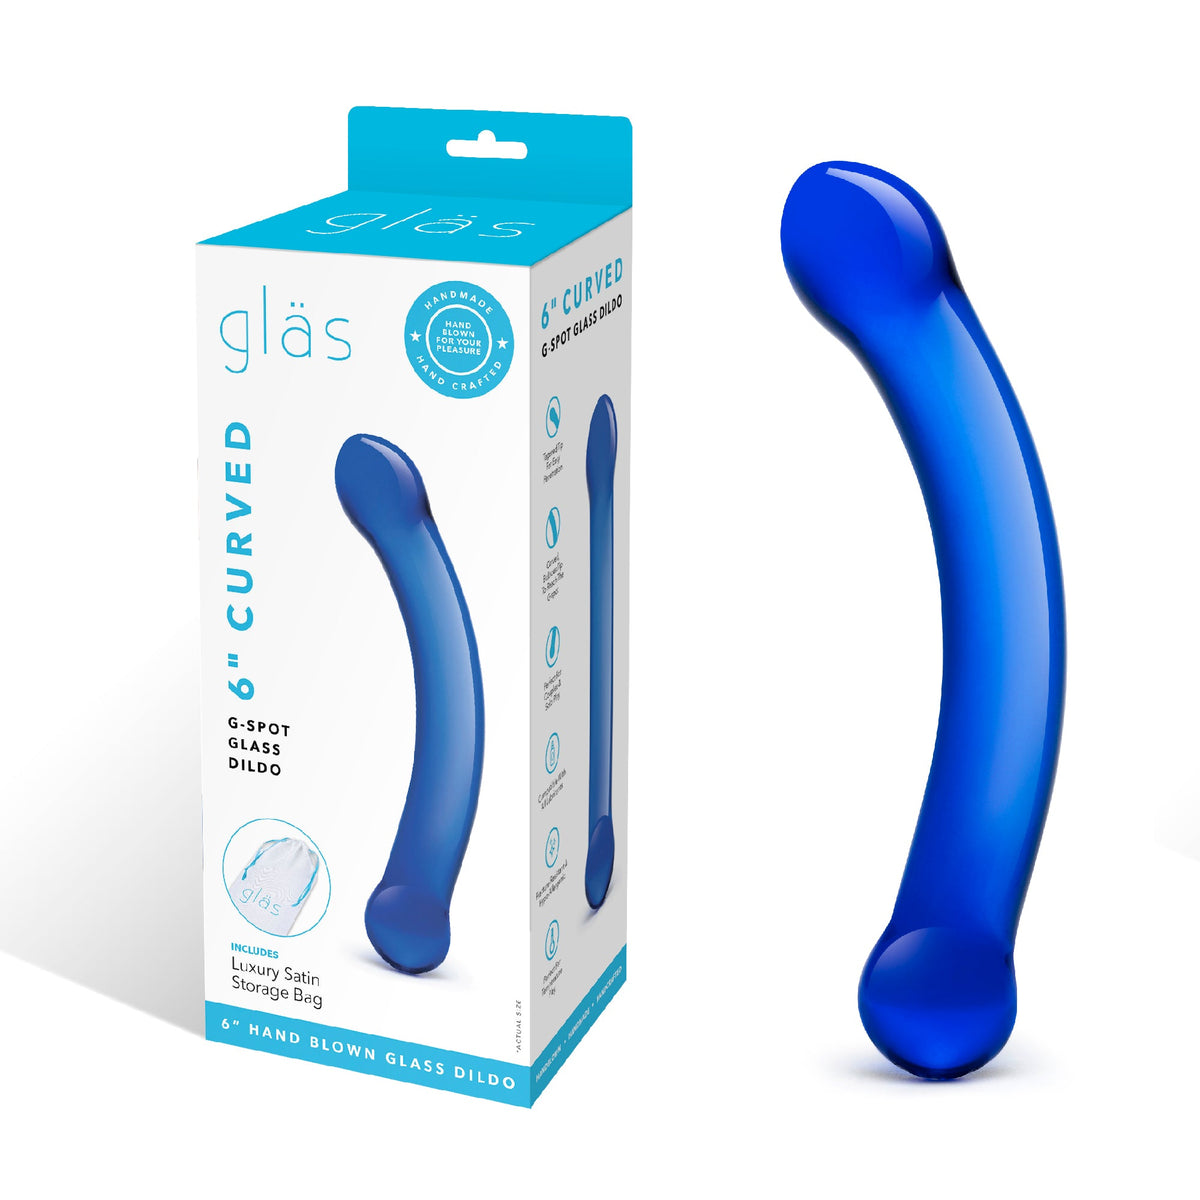 Glas - Curved G Spot Hand Blown Glass Dildo 6&quot; (Blue)